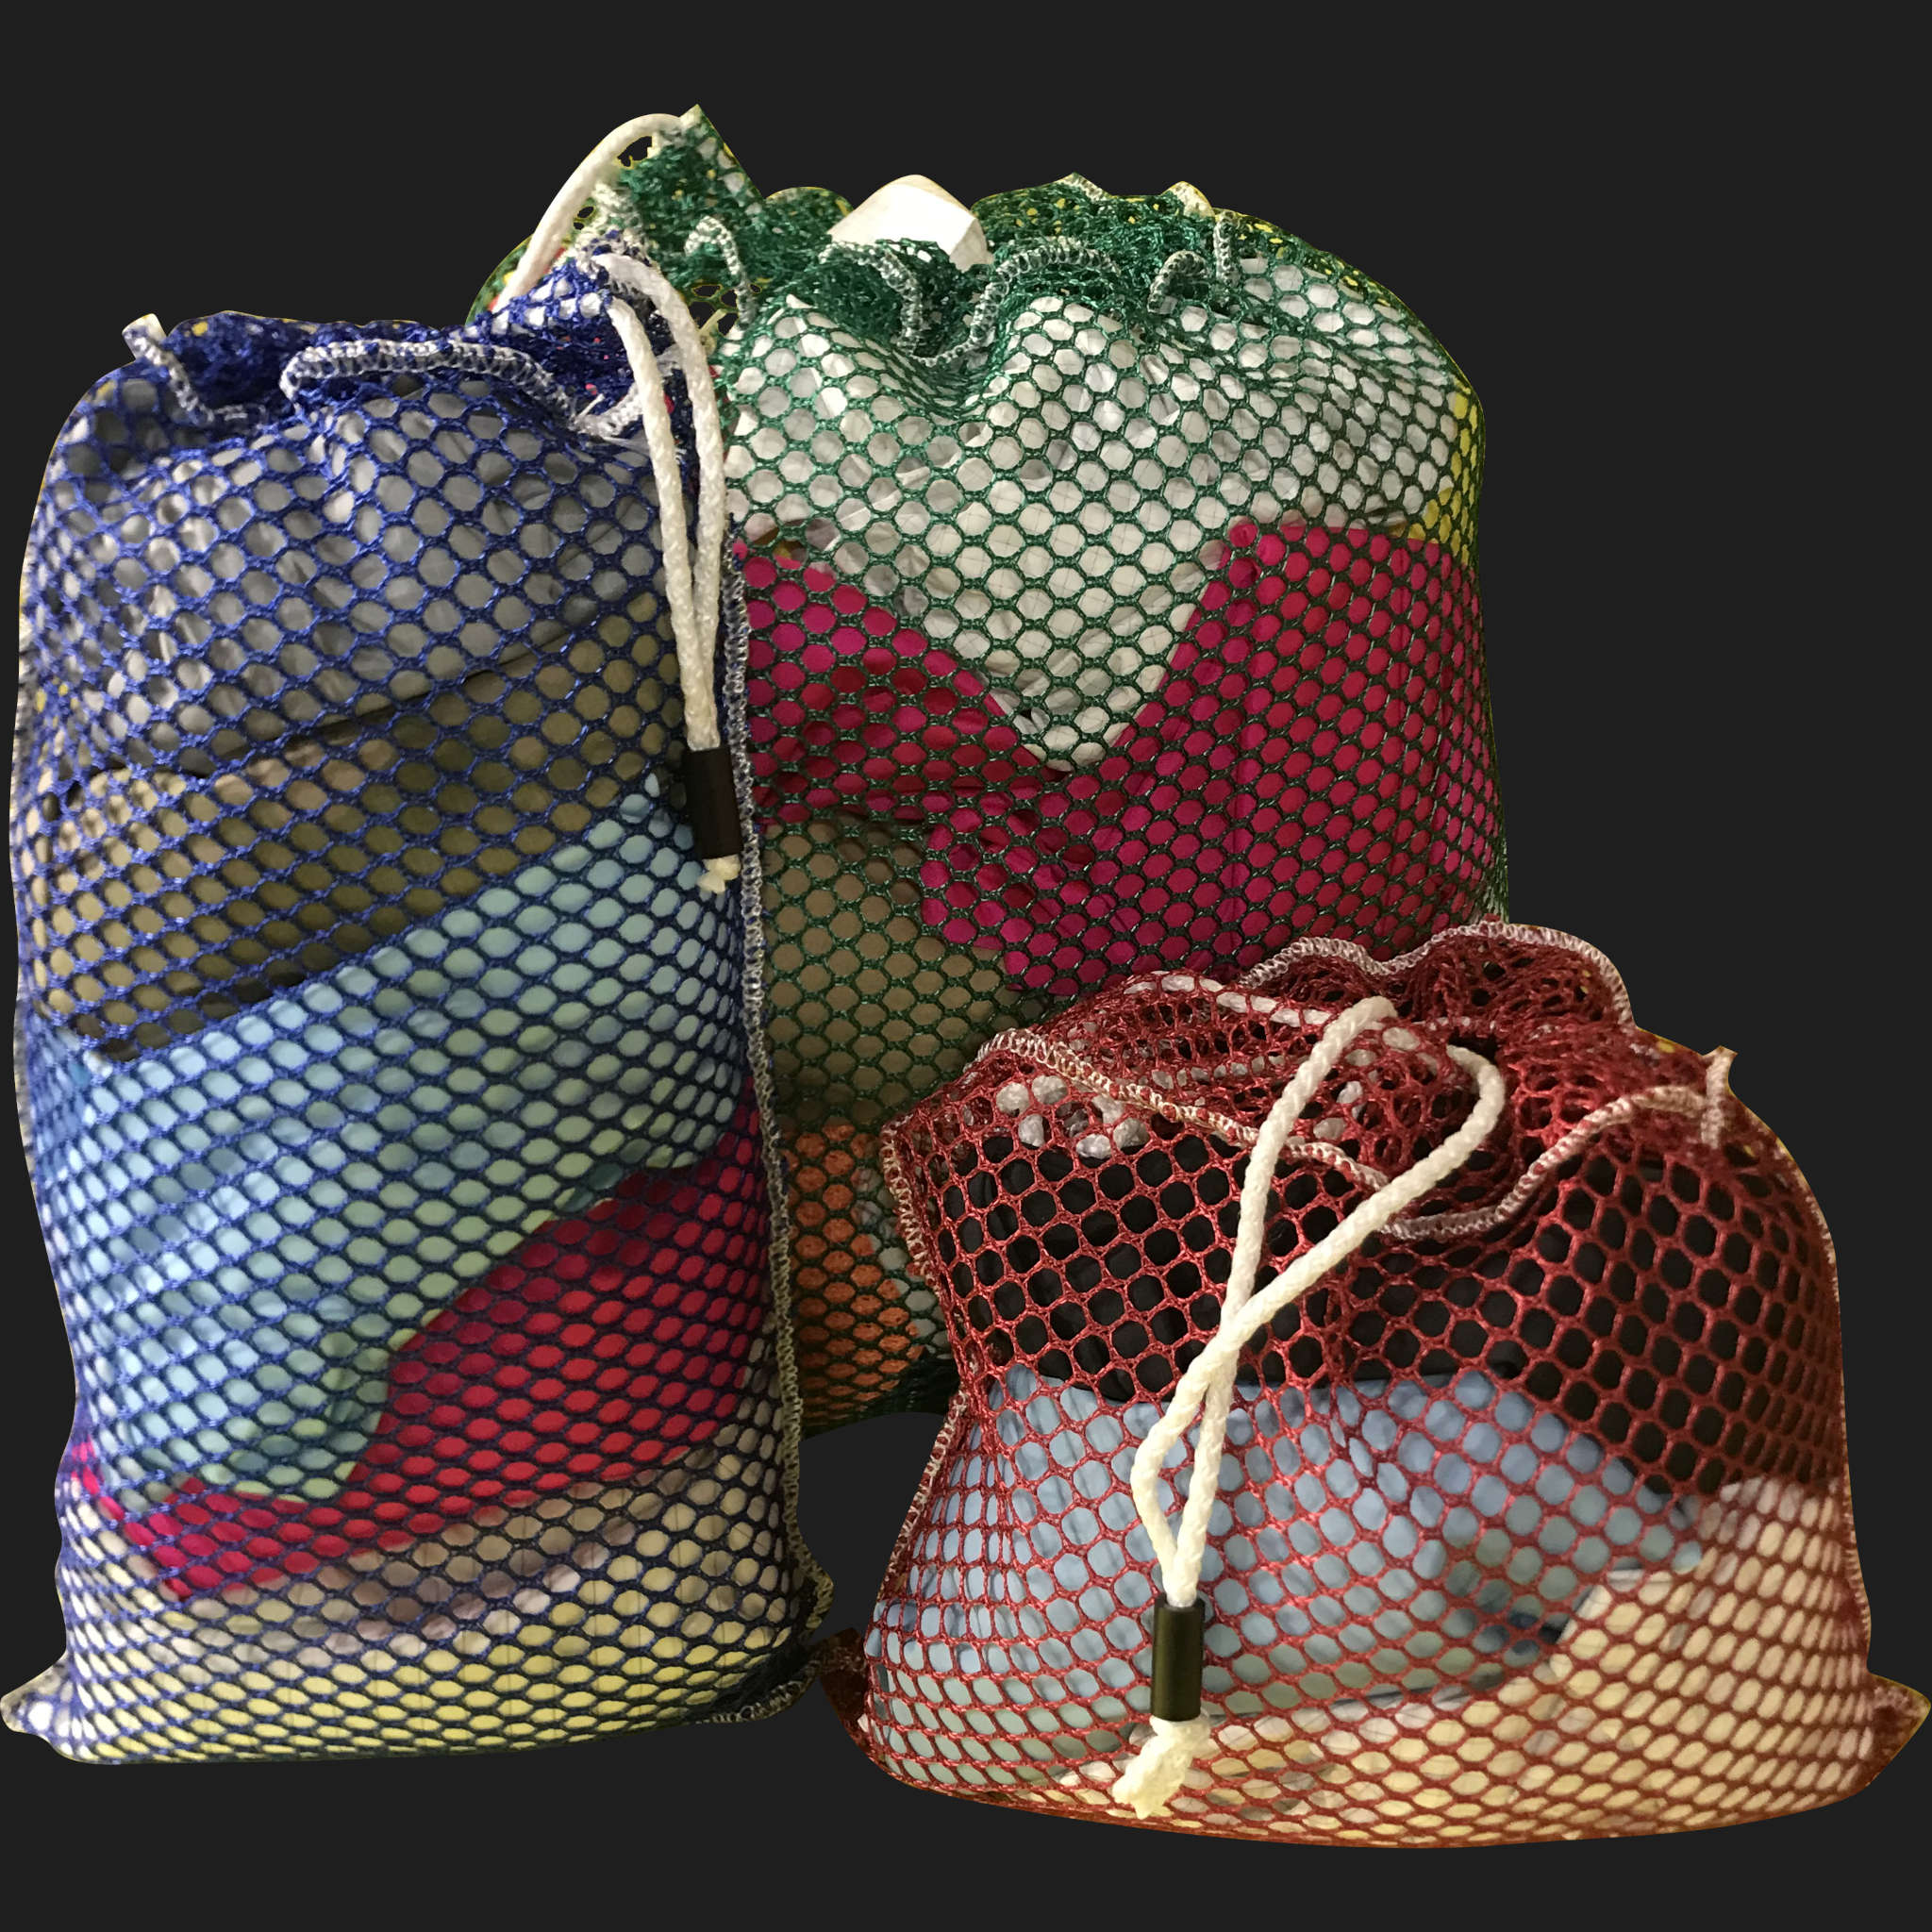 20" x 44" Customized Mesh-Net-Laundry Bags Heavy Duty with Cord and barrellock closure